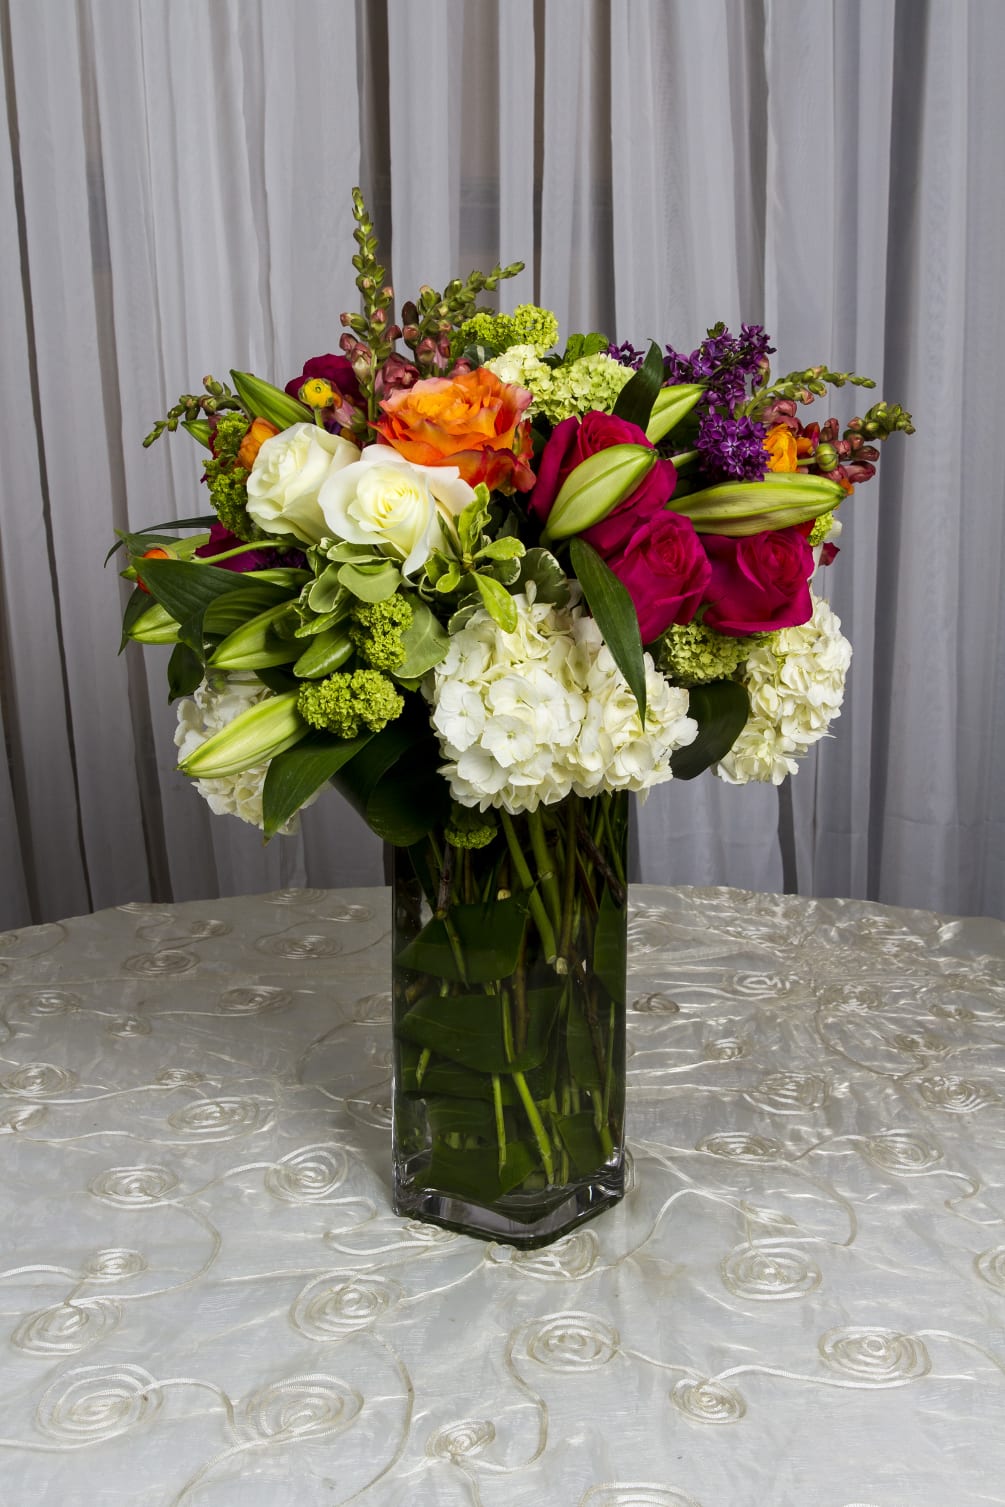 Mom will love this arrangement, bursting at the seams with roses, hydrangeas